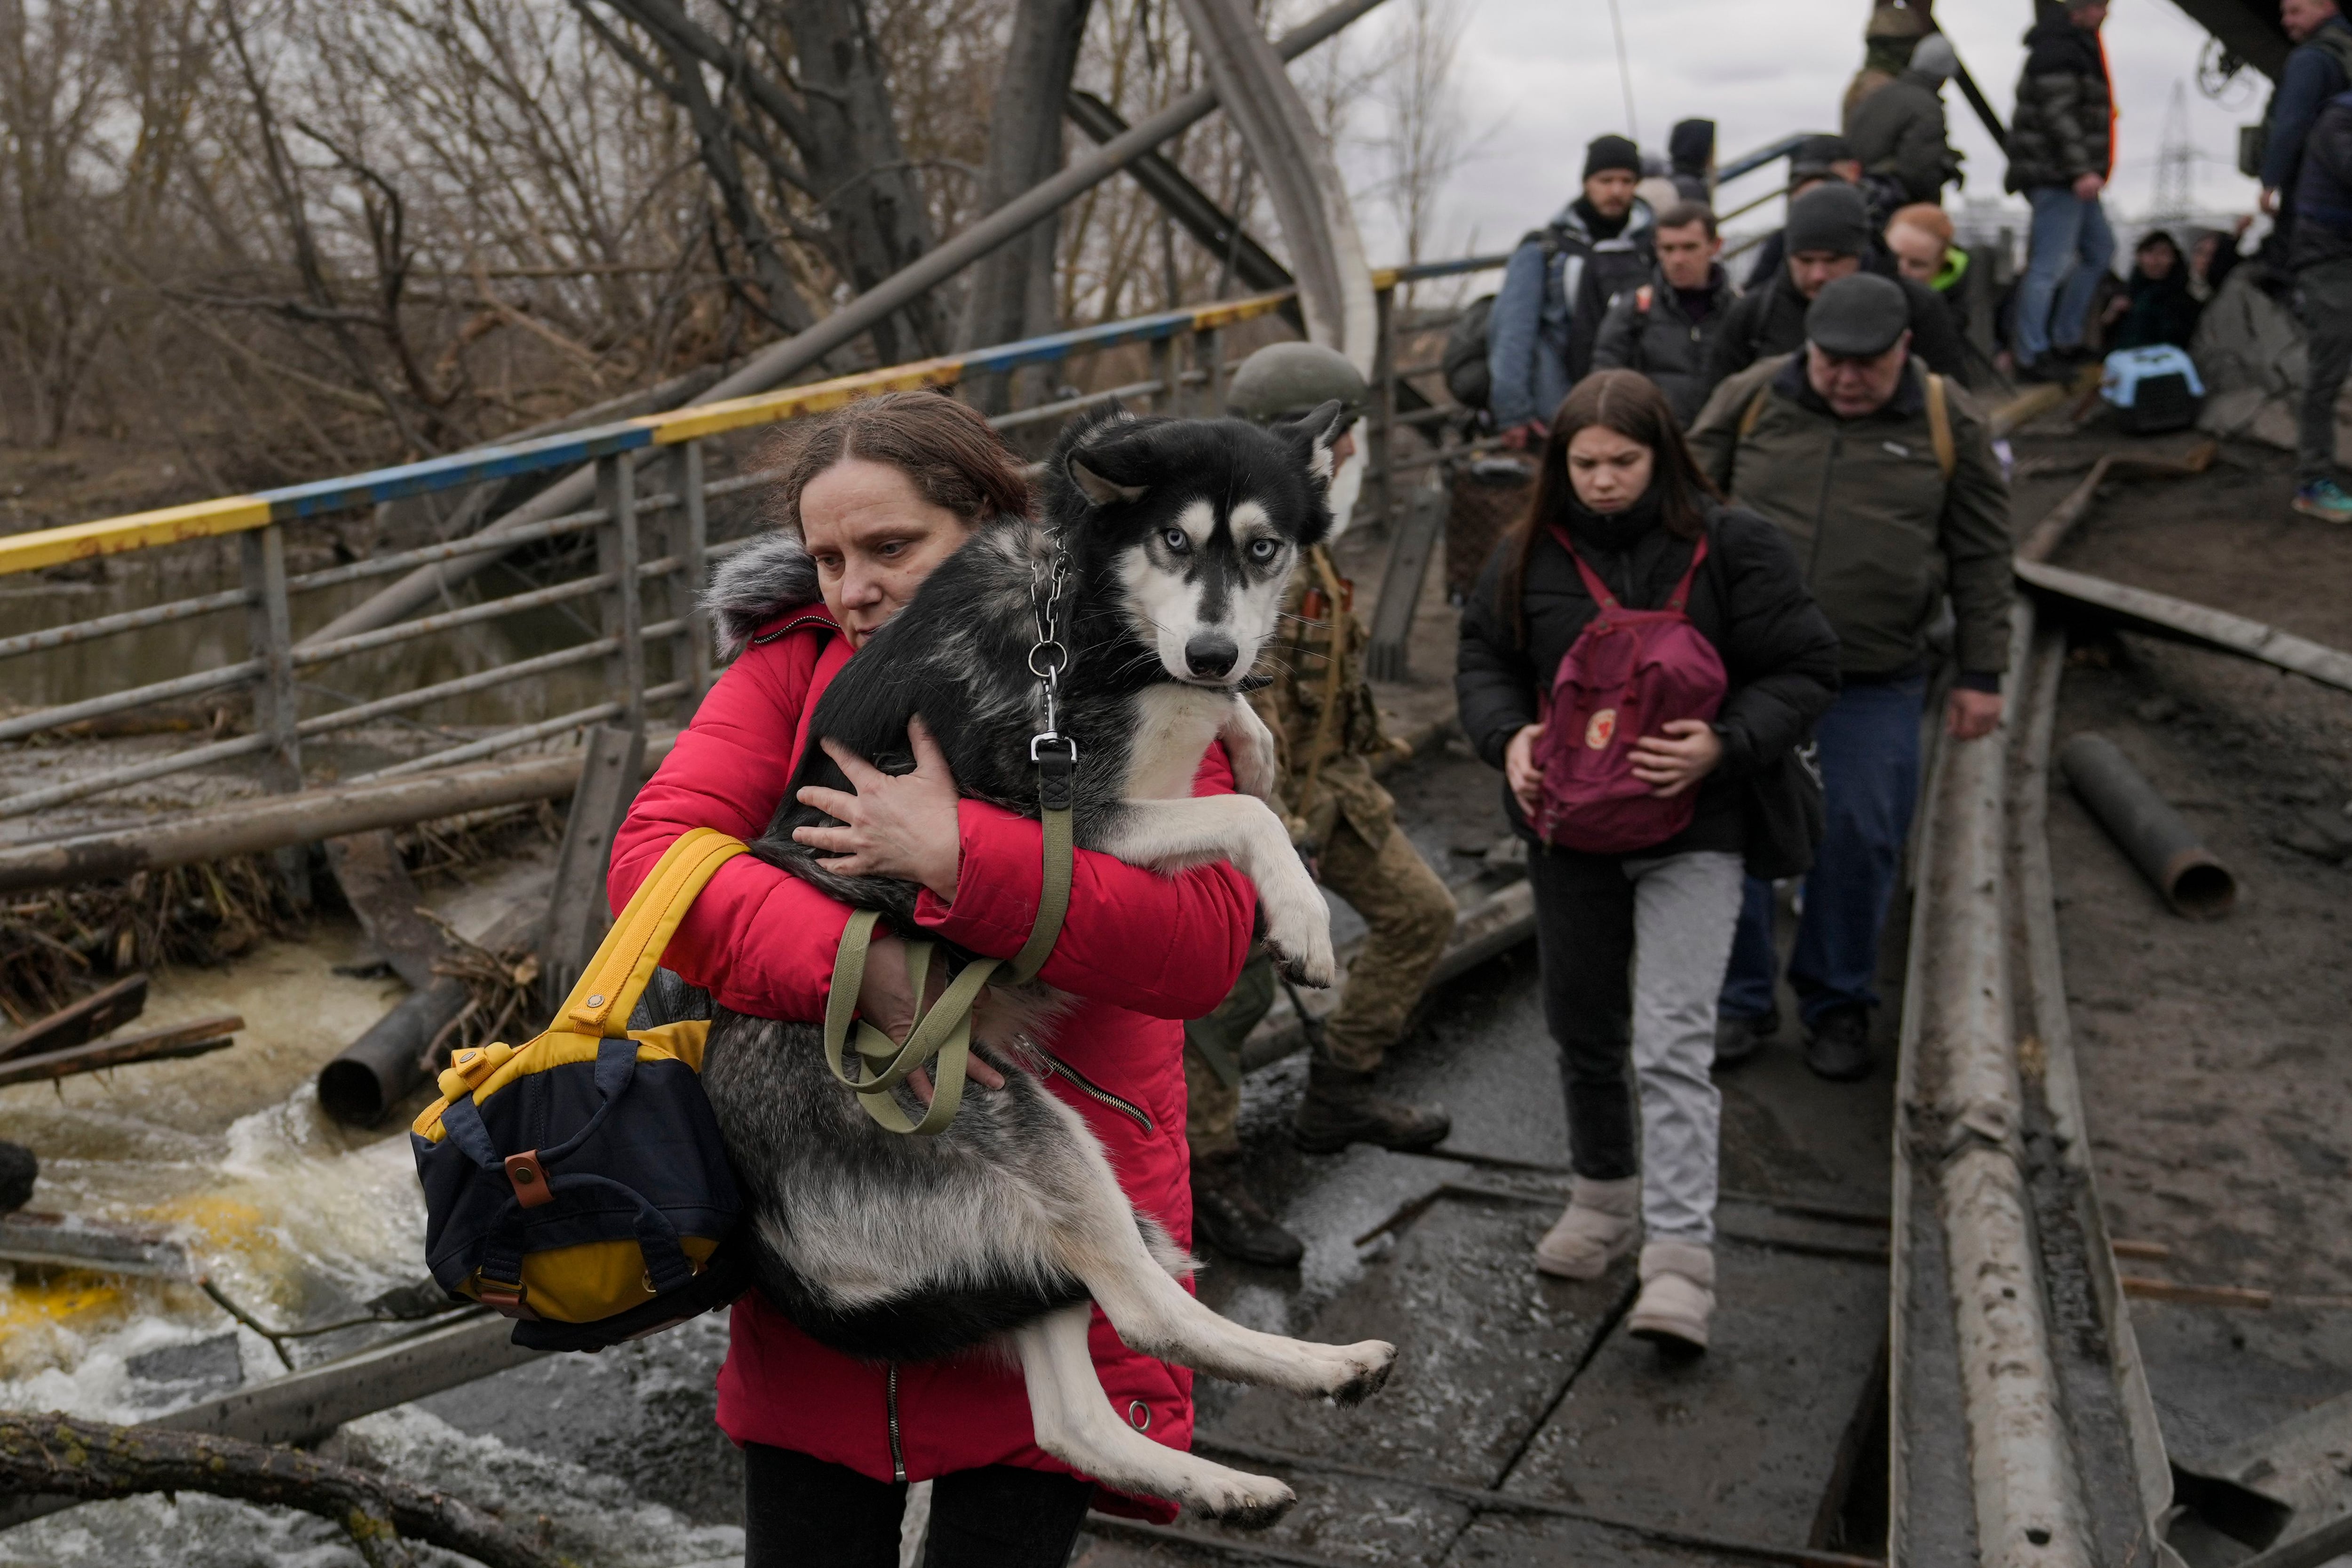 A woman holds a dog while crossing the Irpin River on an improvised path under a bridge that was destroyed by a Russian airstrike, while assisting people fleeing the town of Irpin, Ukraine, Saturday, March 5, 2022. (Vadim Ghirda/AP)